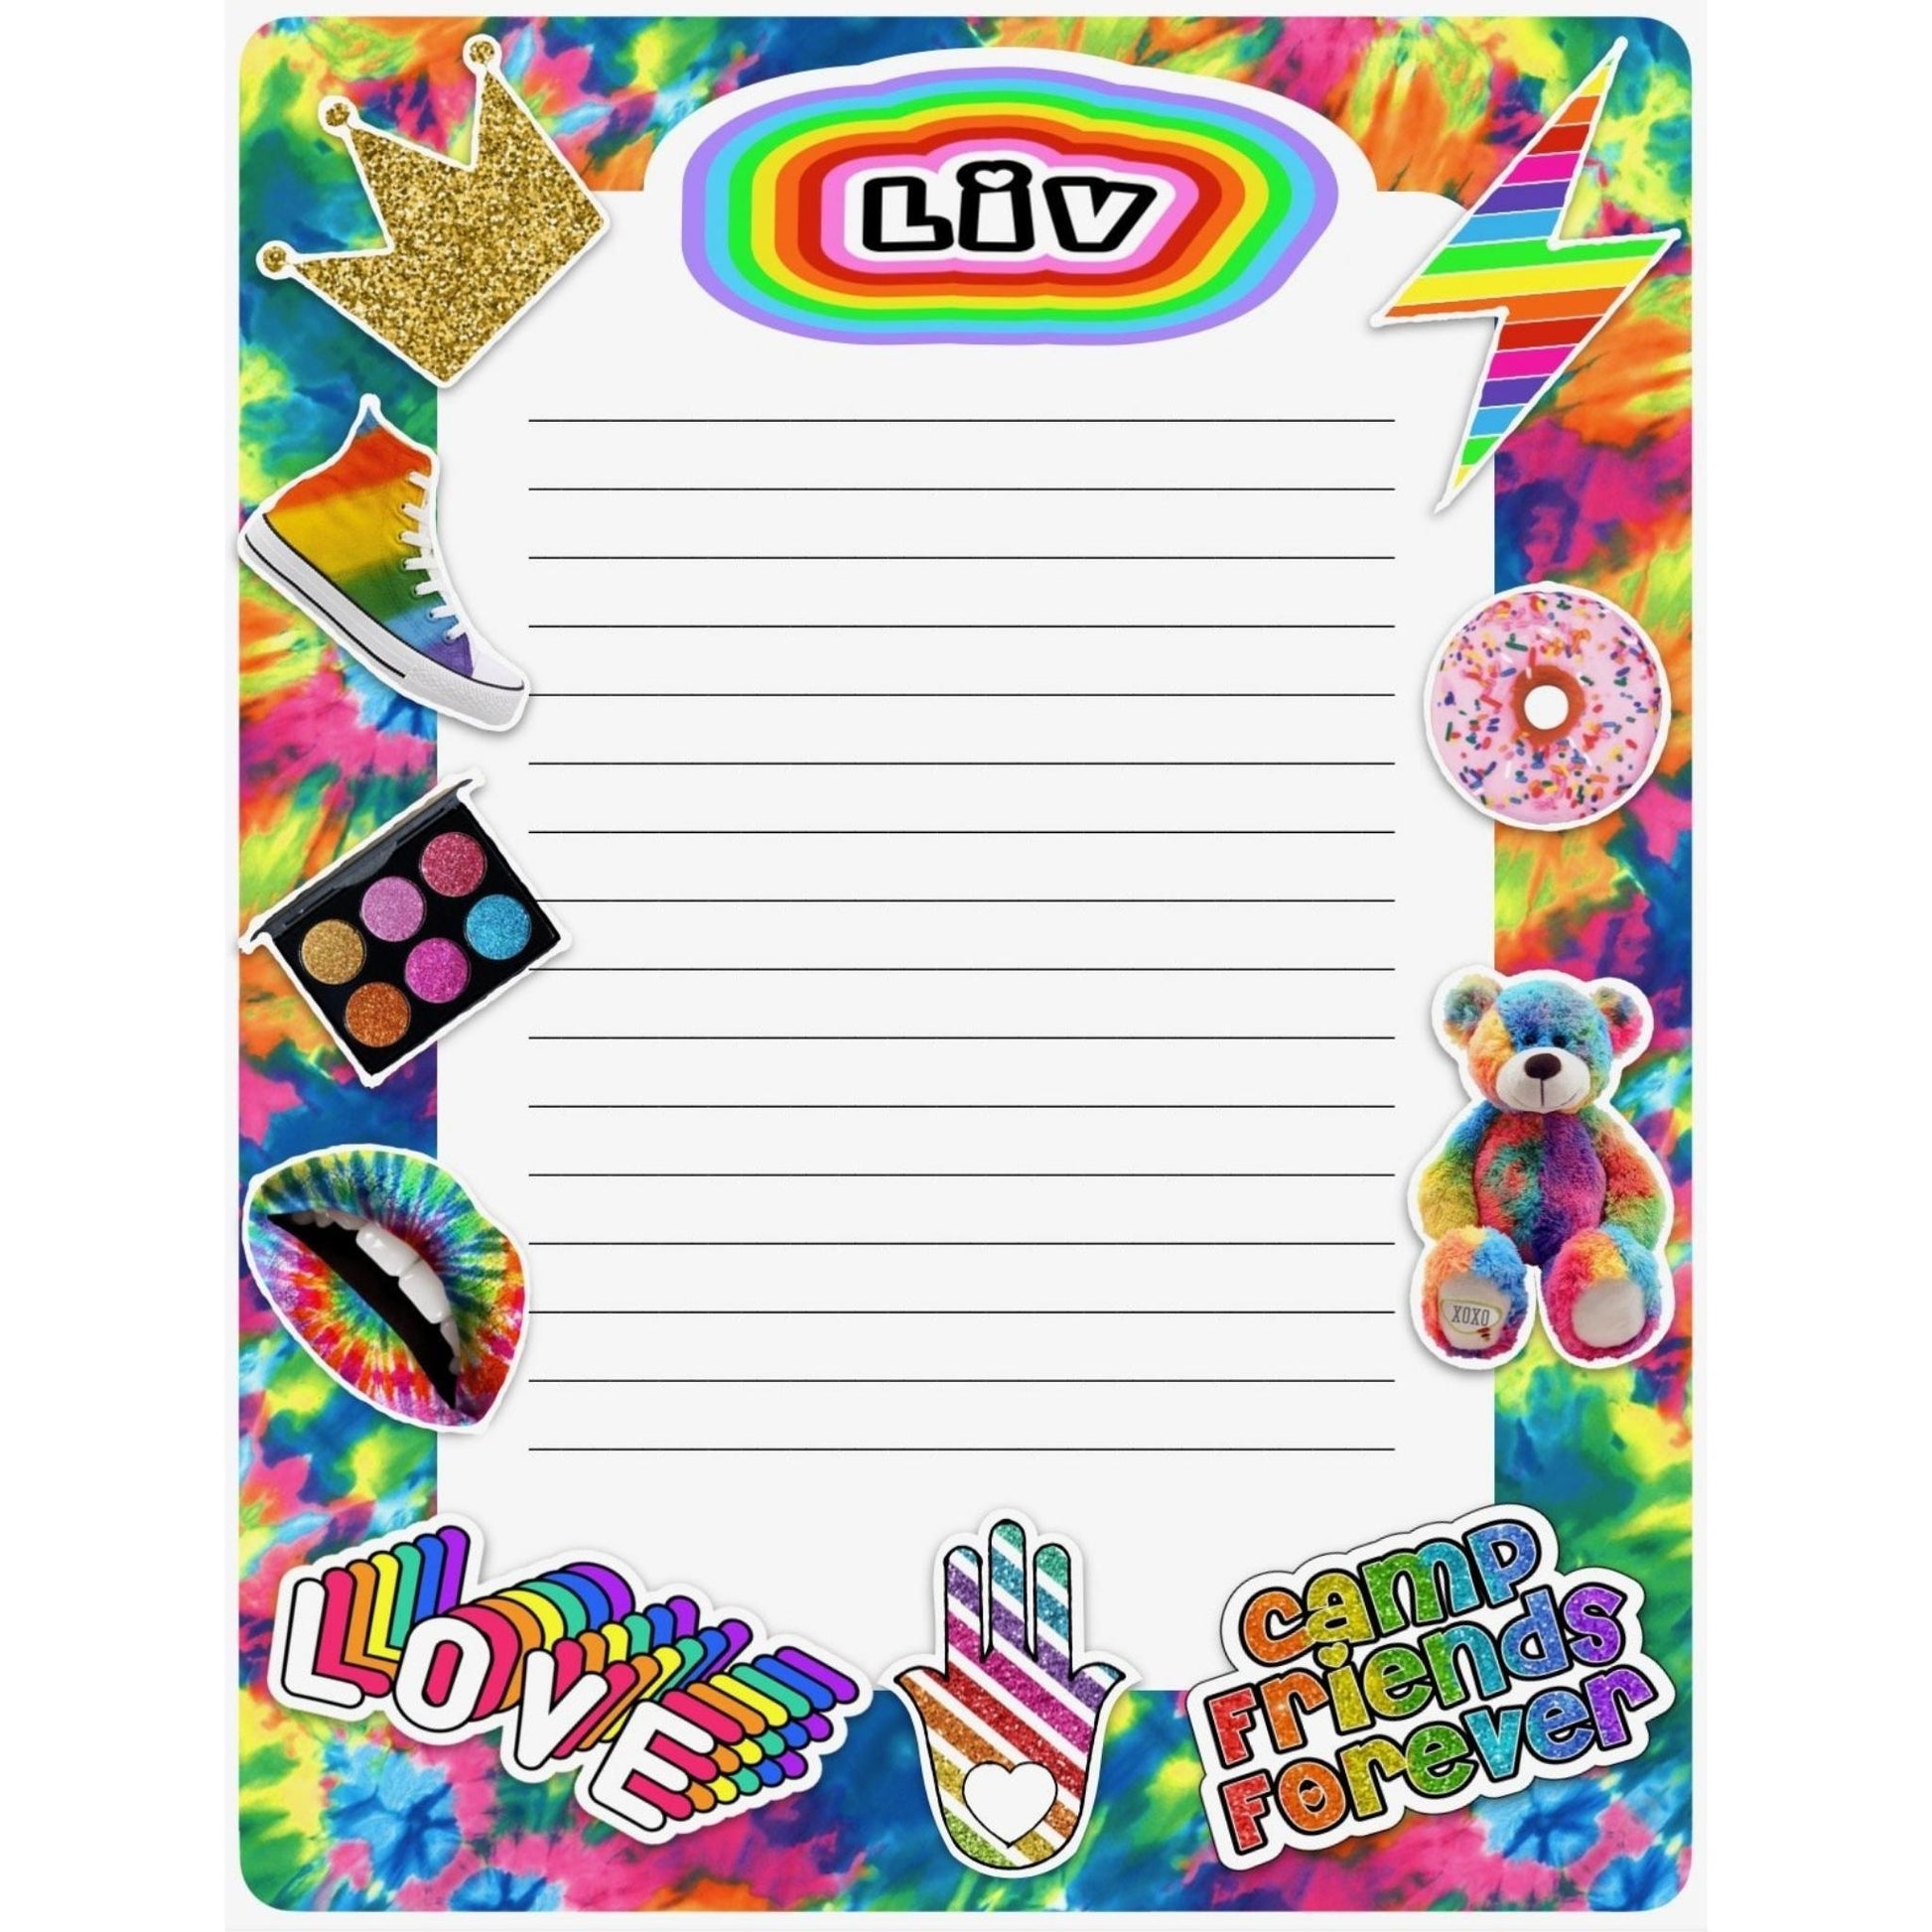 Top Ten Favorite Things Stationery - a Spirit Animal - Cling Its Name Needed Cling Its Name Needed Custom decals